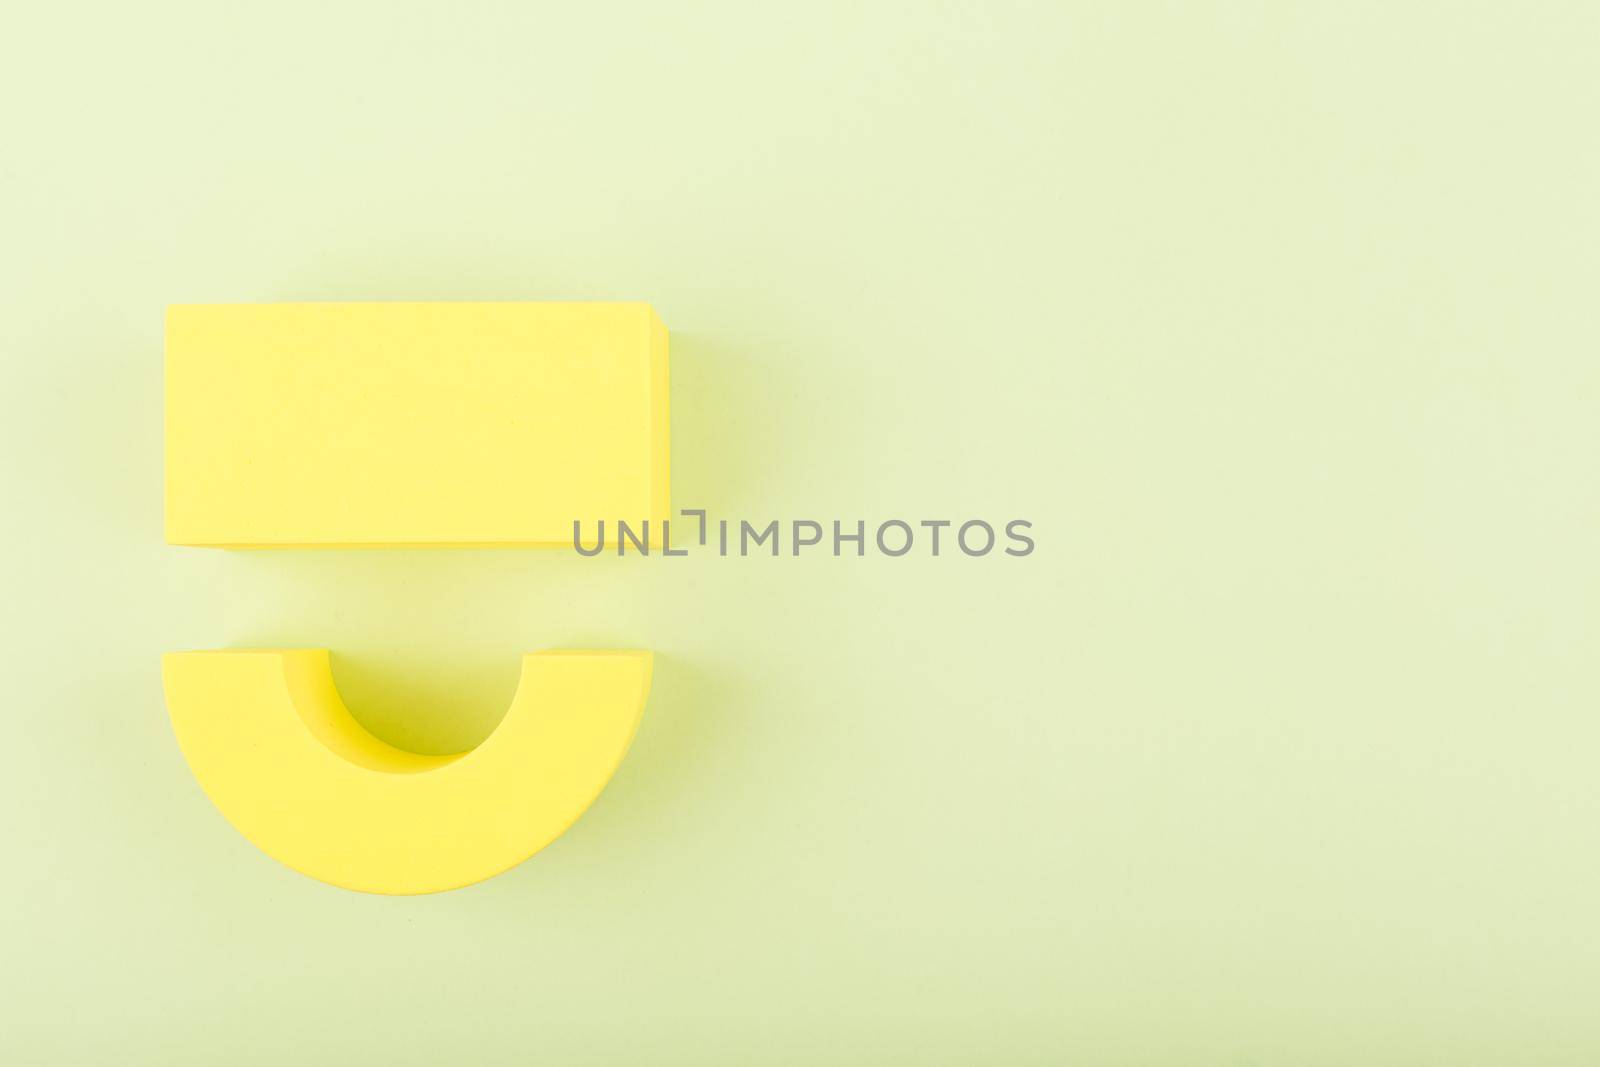 Creative flat lay with yellow happy smile symbol made of figures on bright green background with copy space. Concept of Smile day, emotions, emoji or mental health